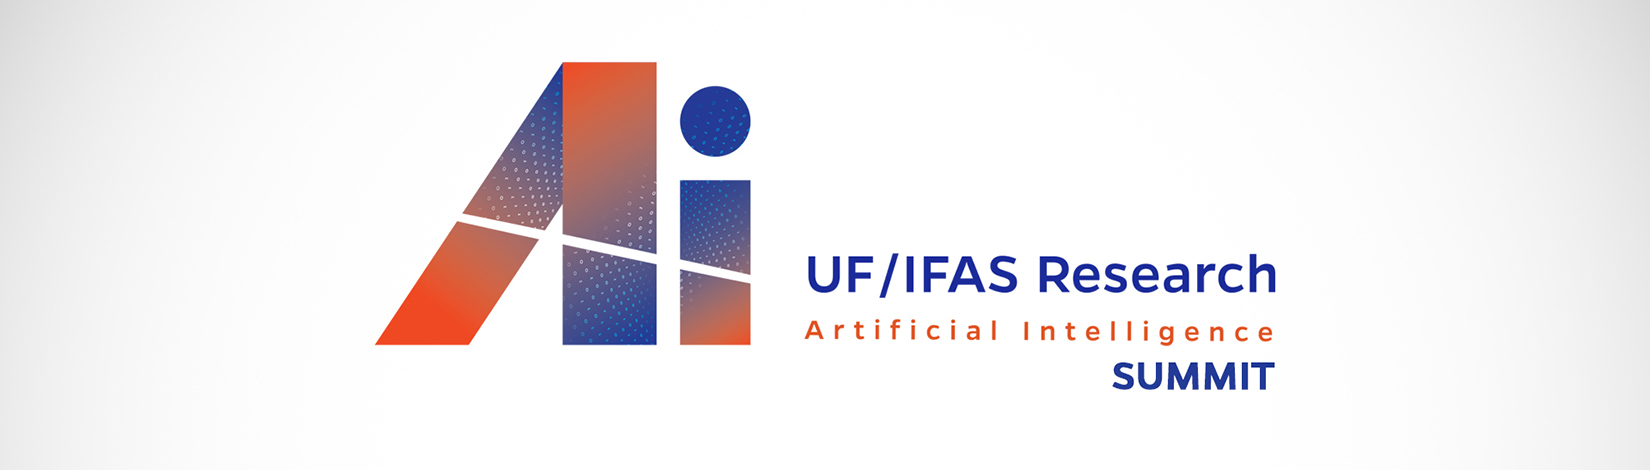 UF/IFAS Research Artificial Intelligence Summit